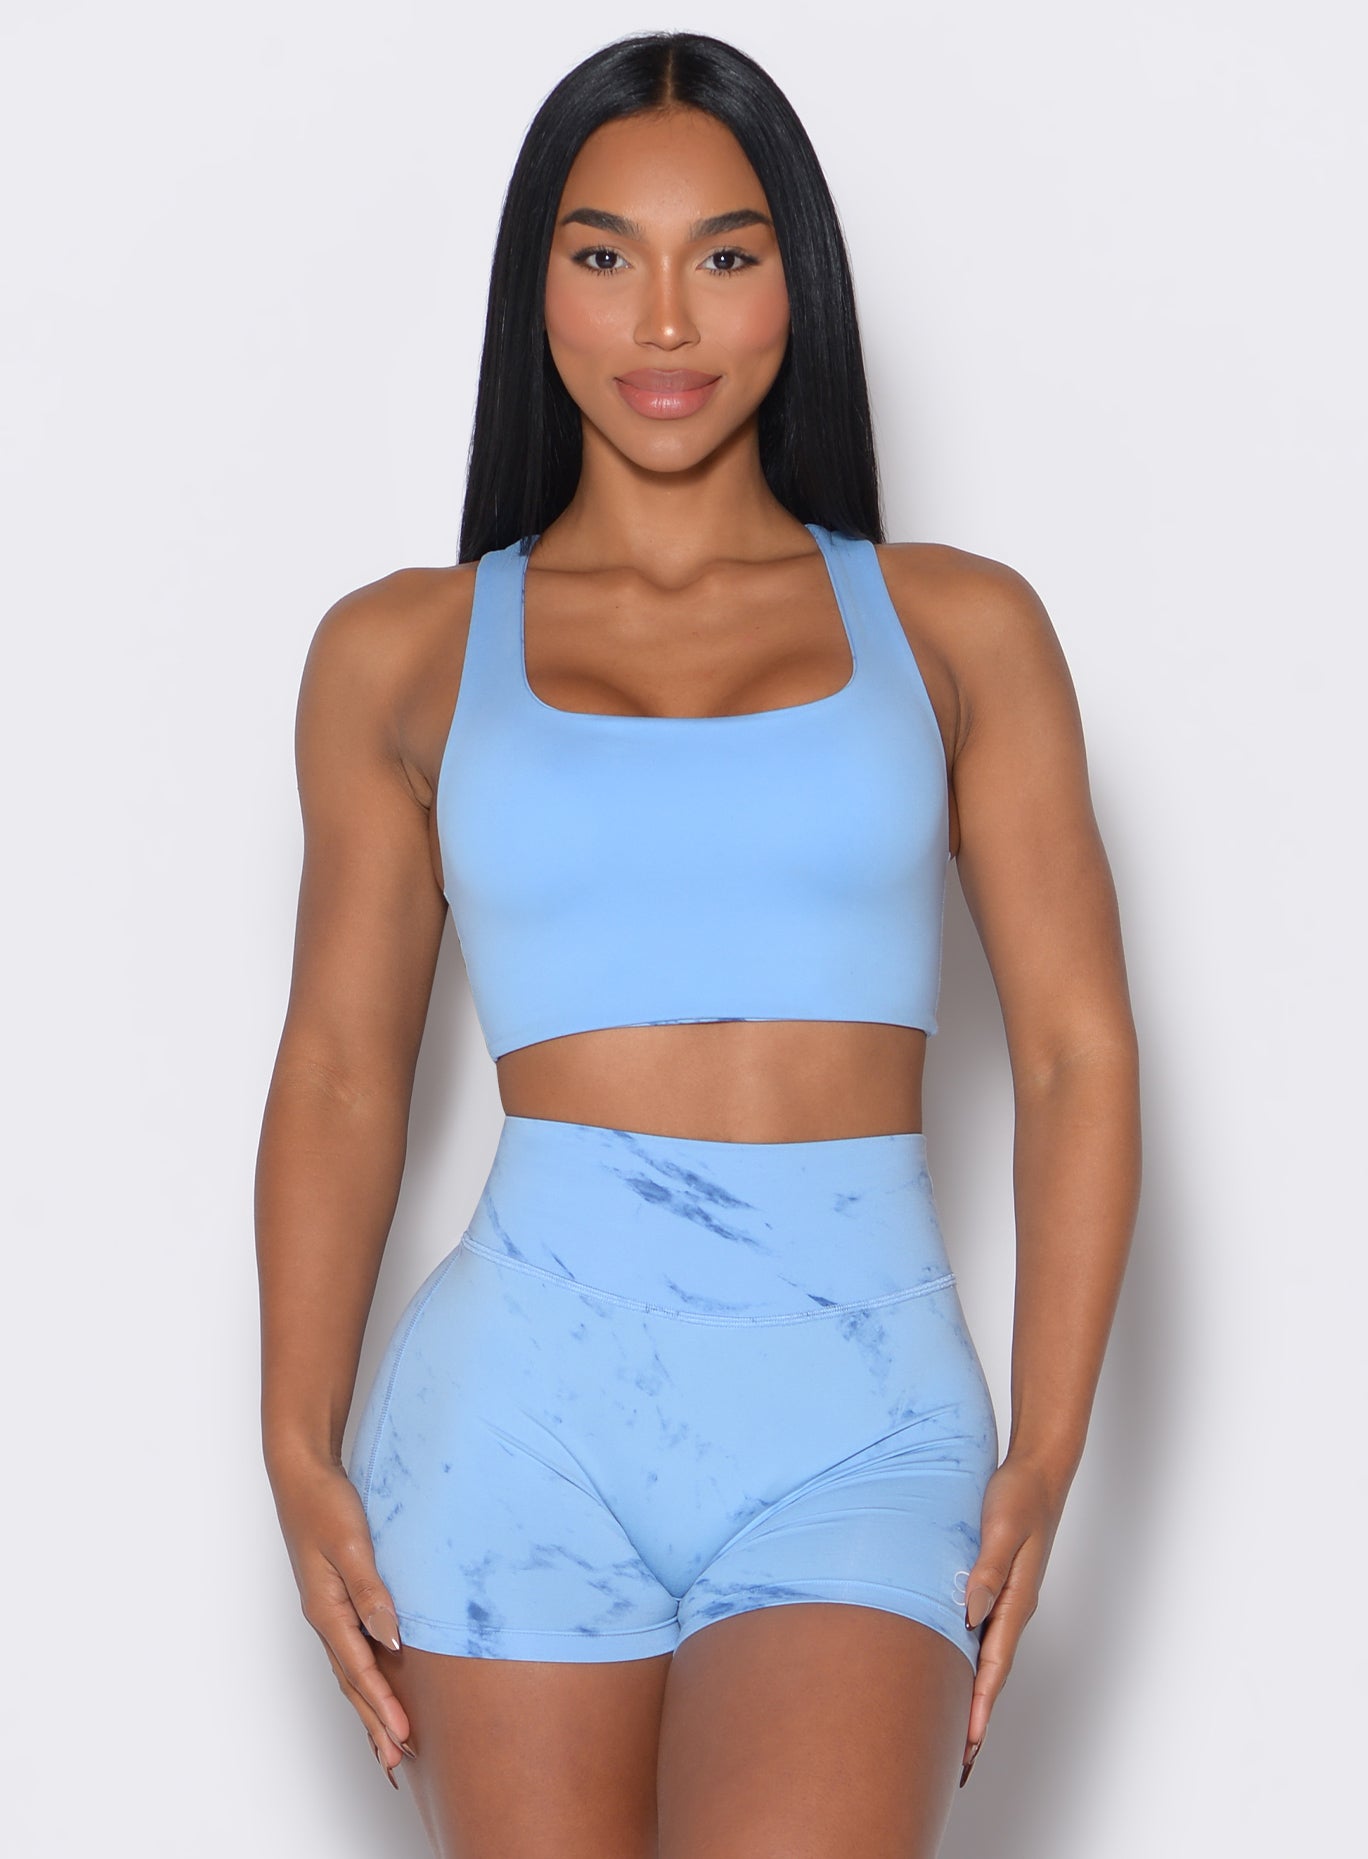 Front profile view of our model wearing the Square Neck Bra in Blue Jay color along with the matching shorts